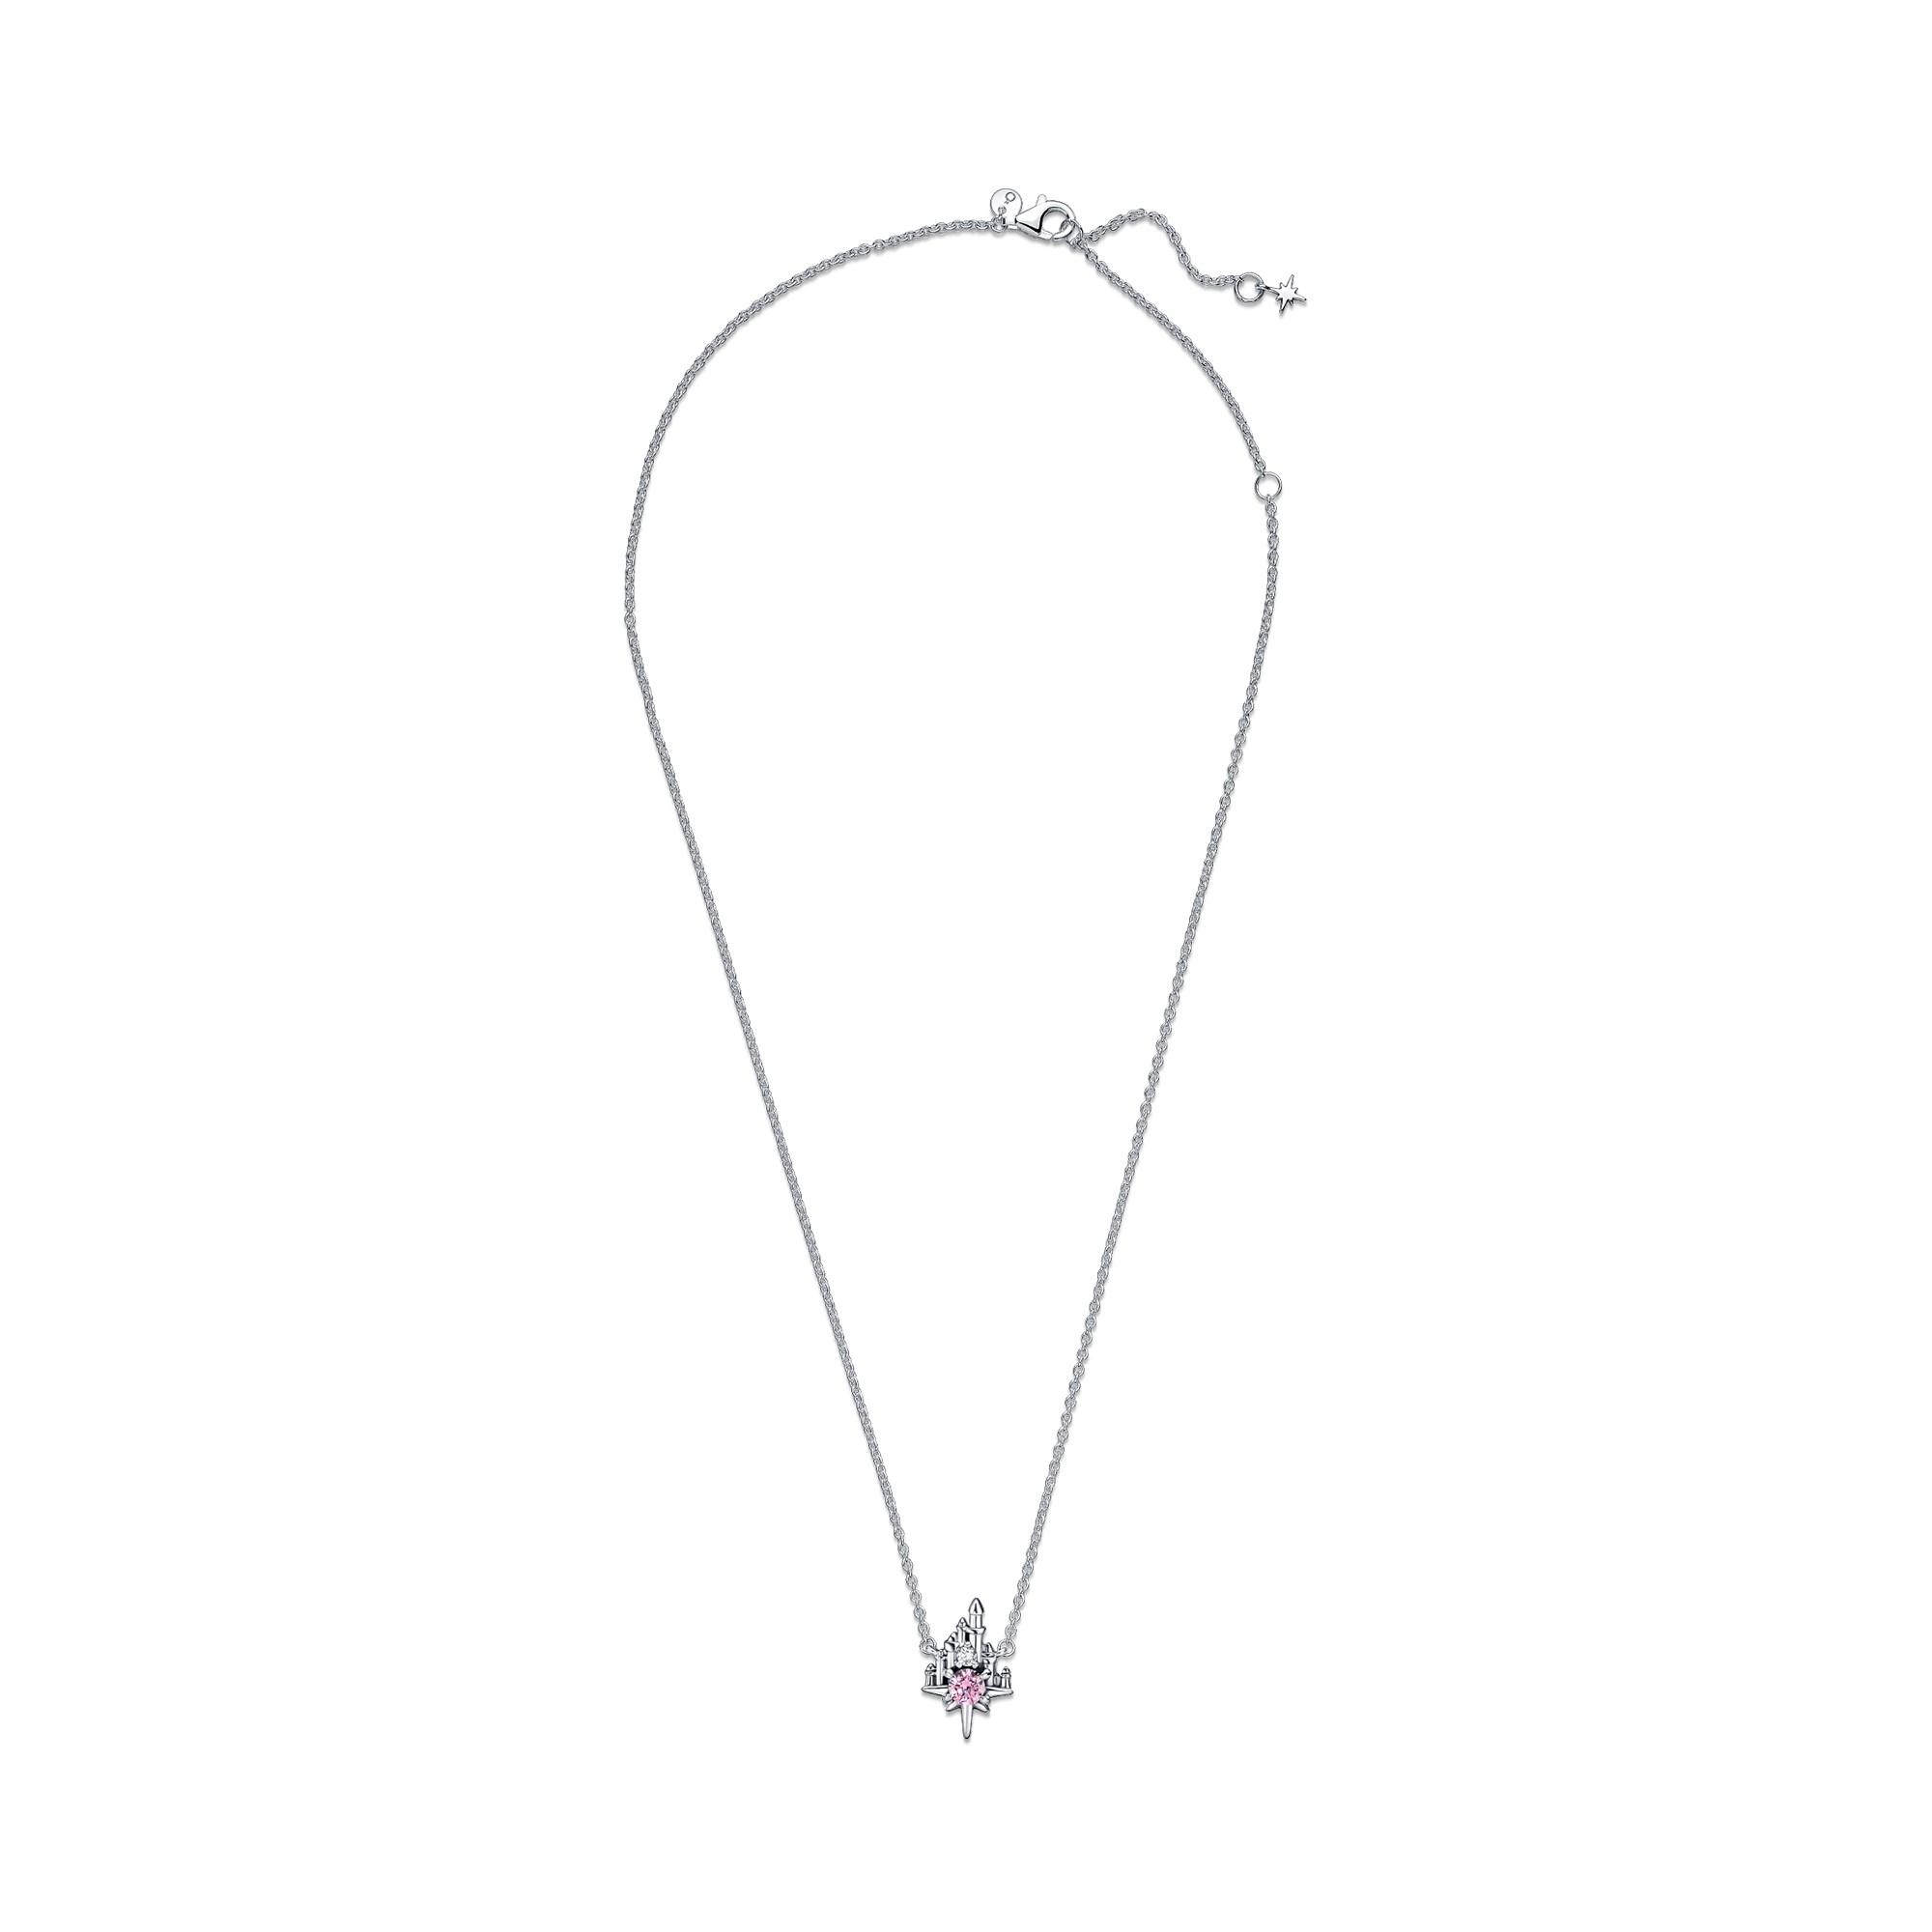 Pandora Star Necklace Silver - $17 - From Anna